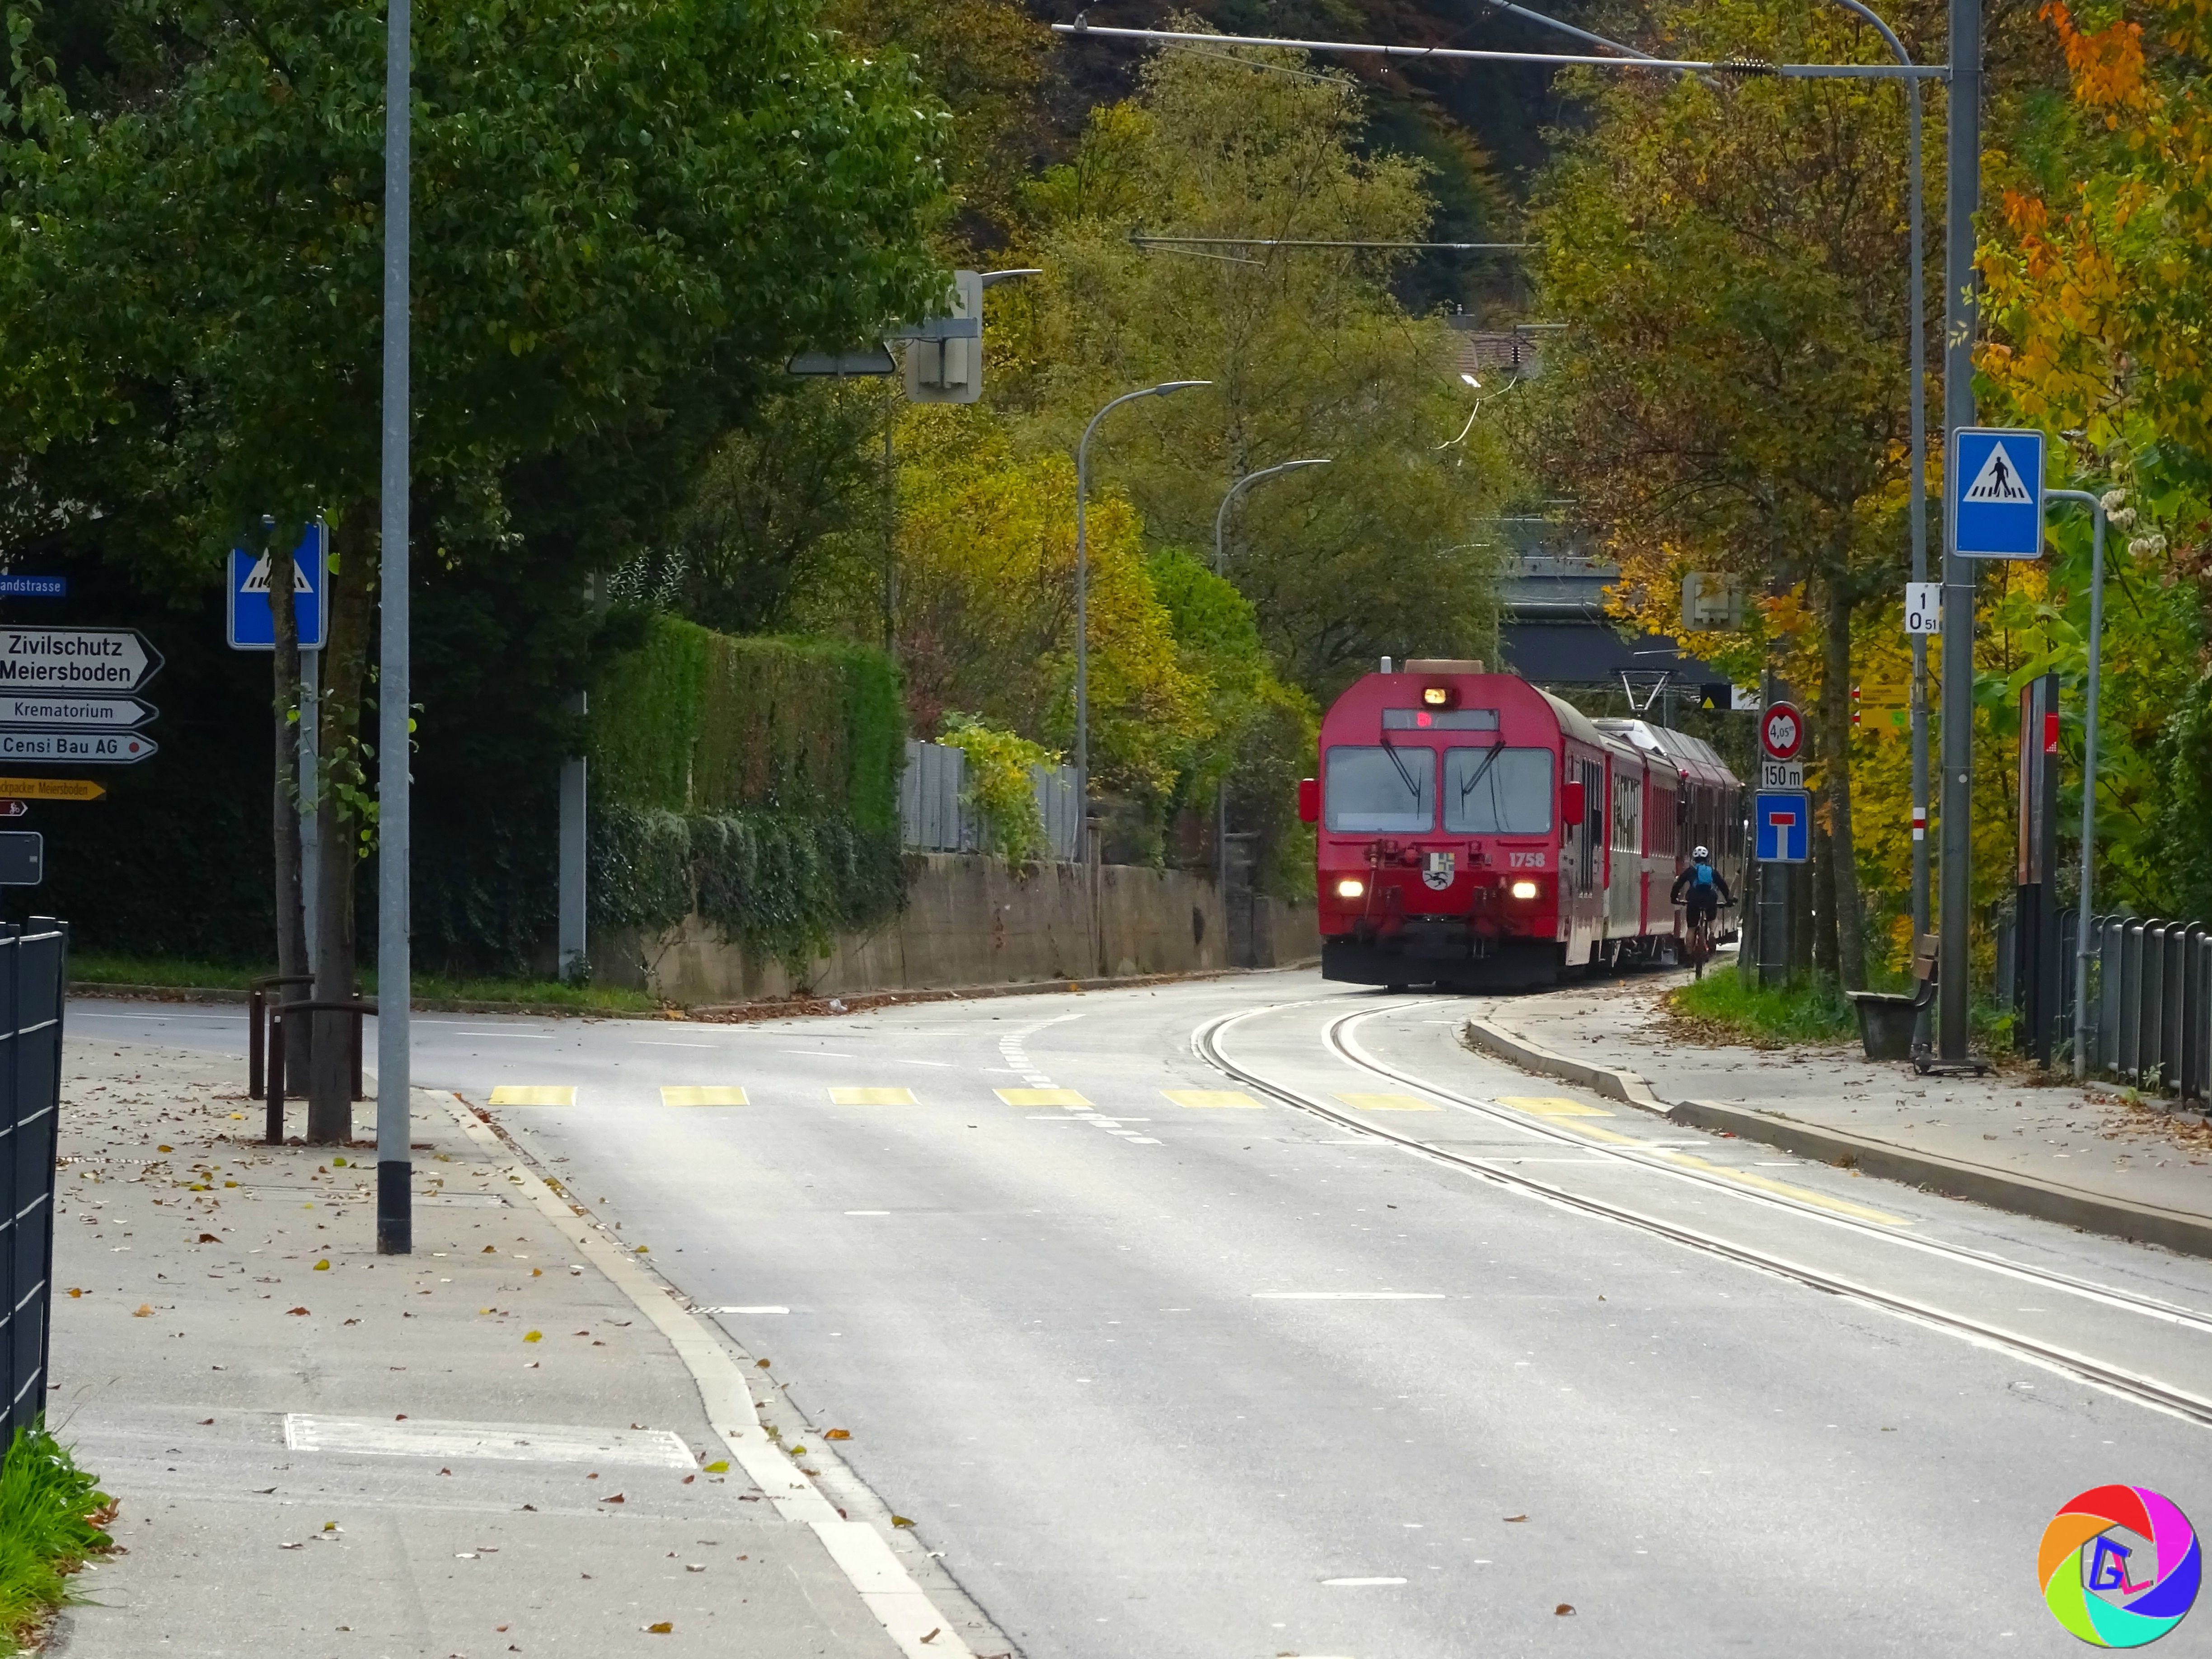 Arosa Line trains travel through streets as they leave the city